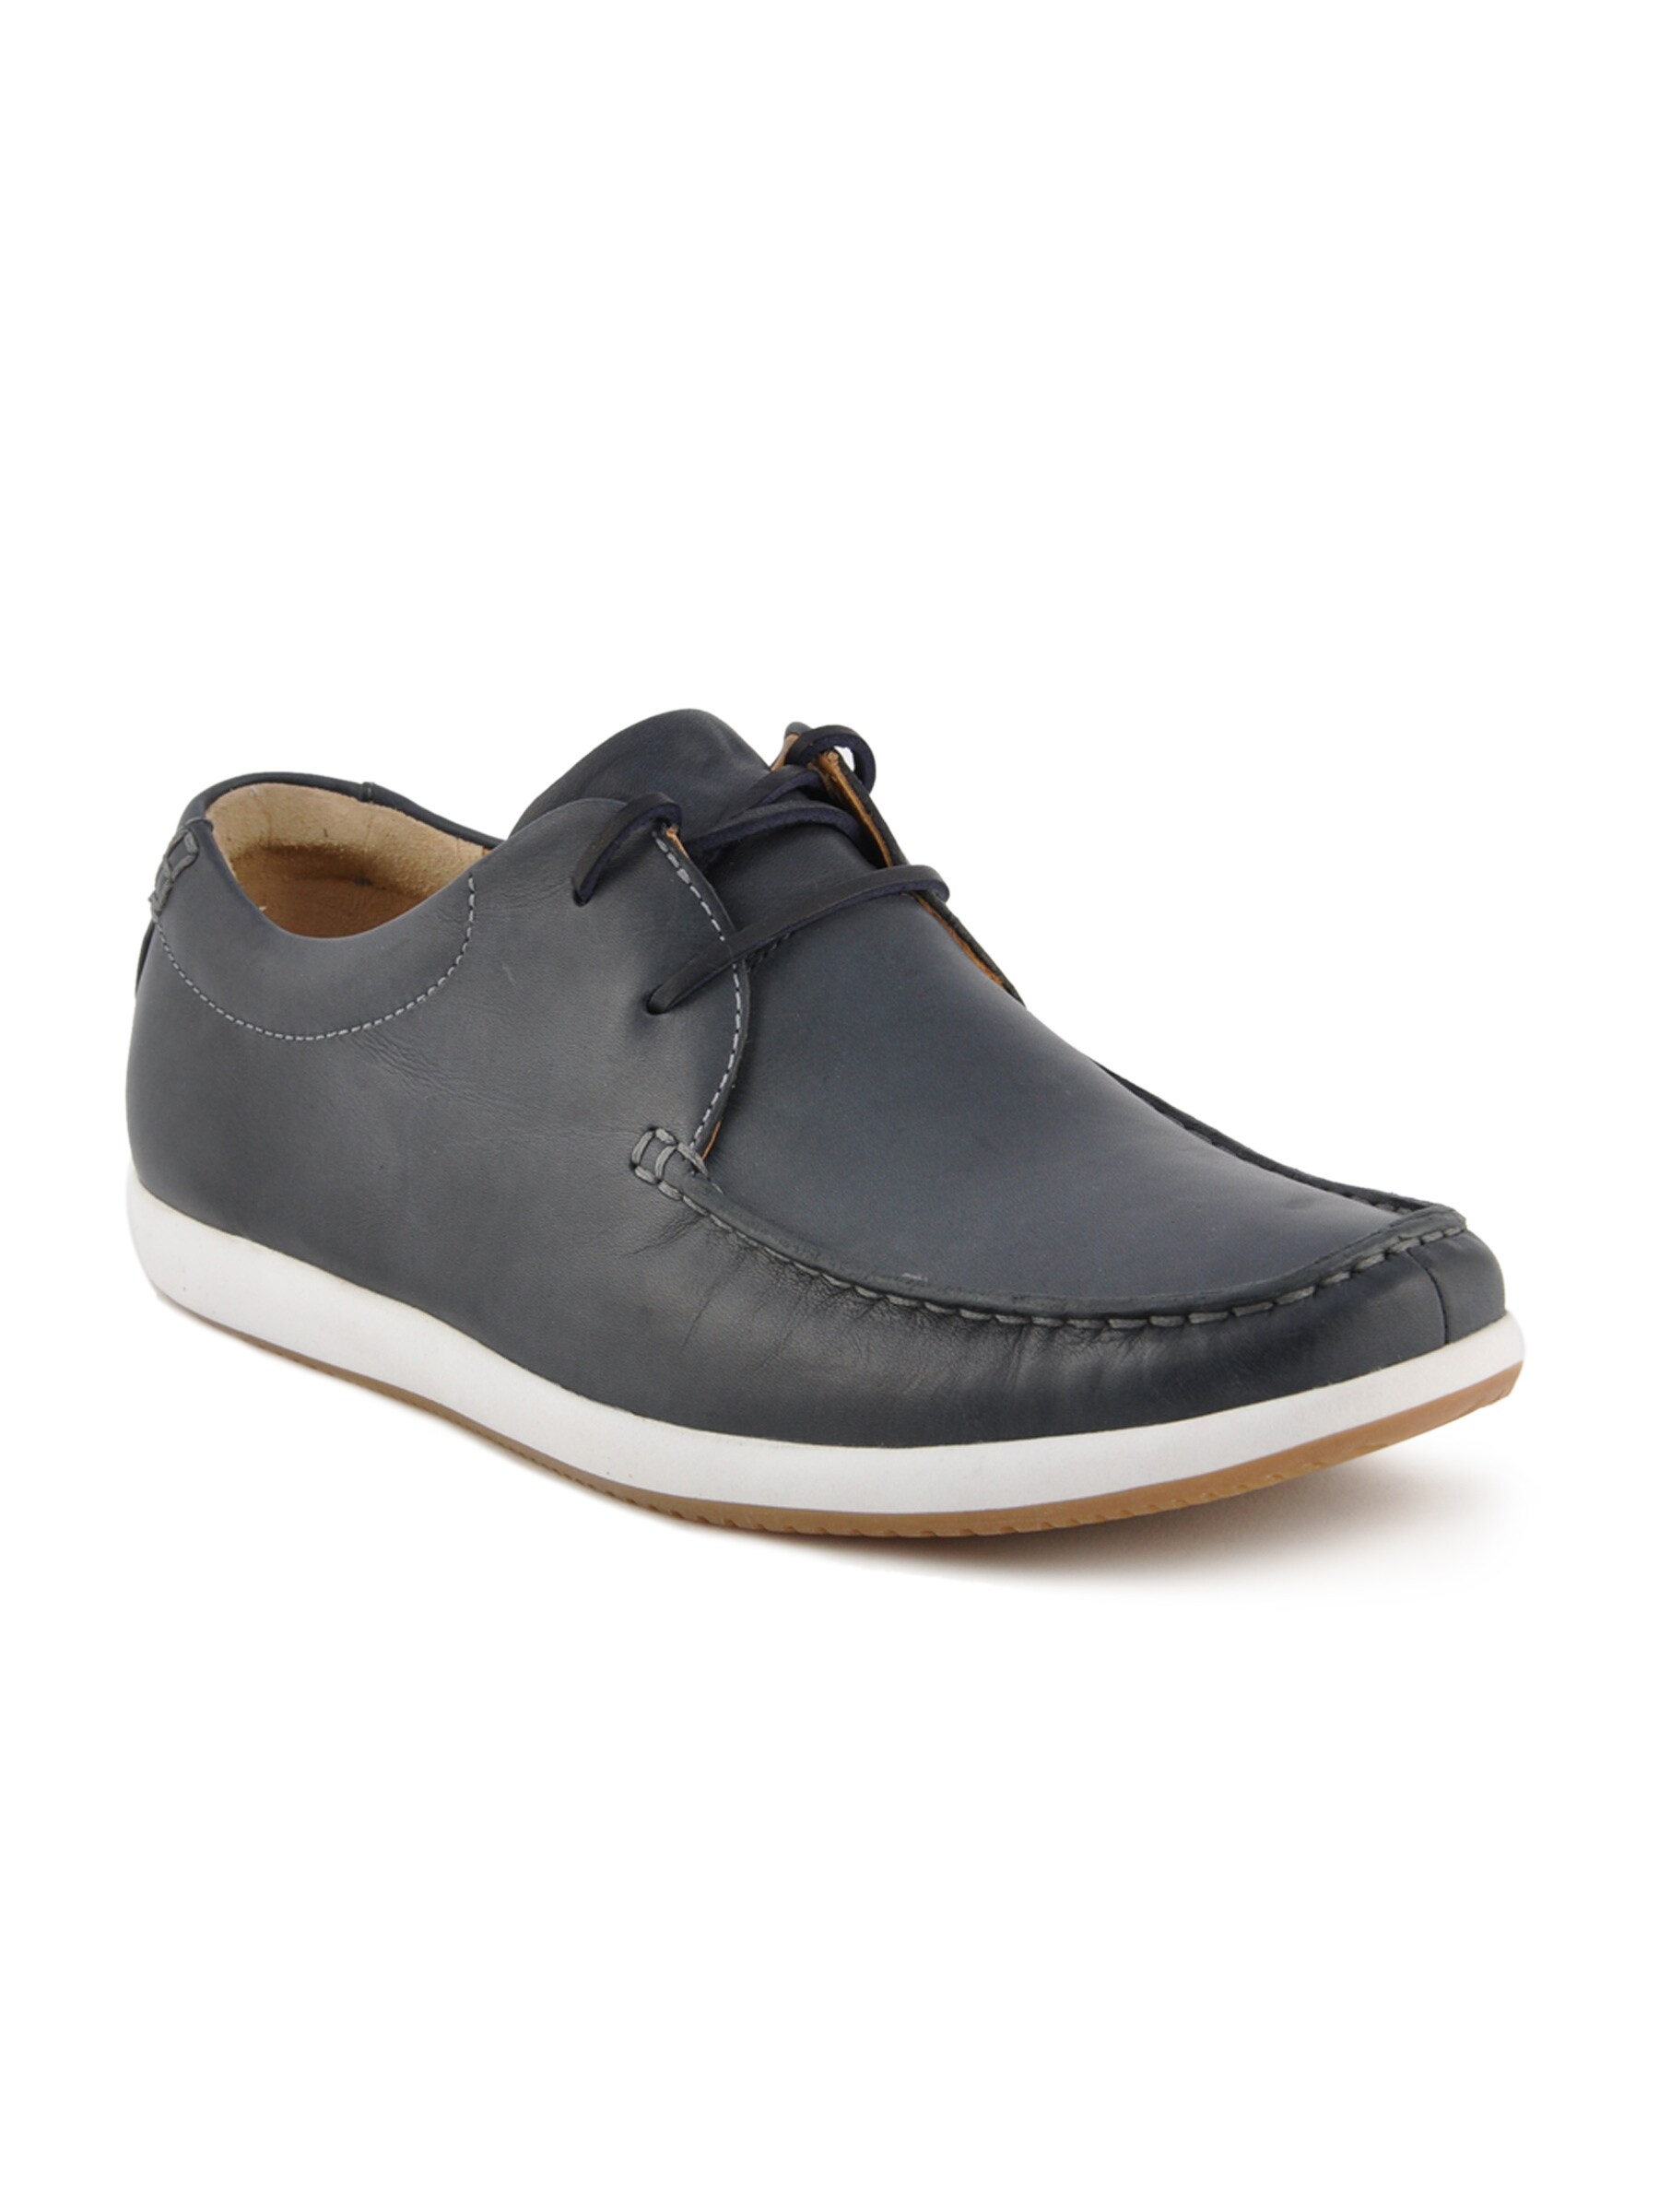 Clarks Men Navy Blue Leather Casual Shoes